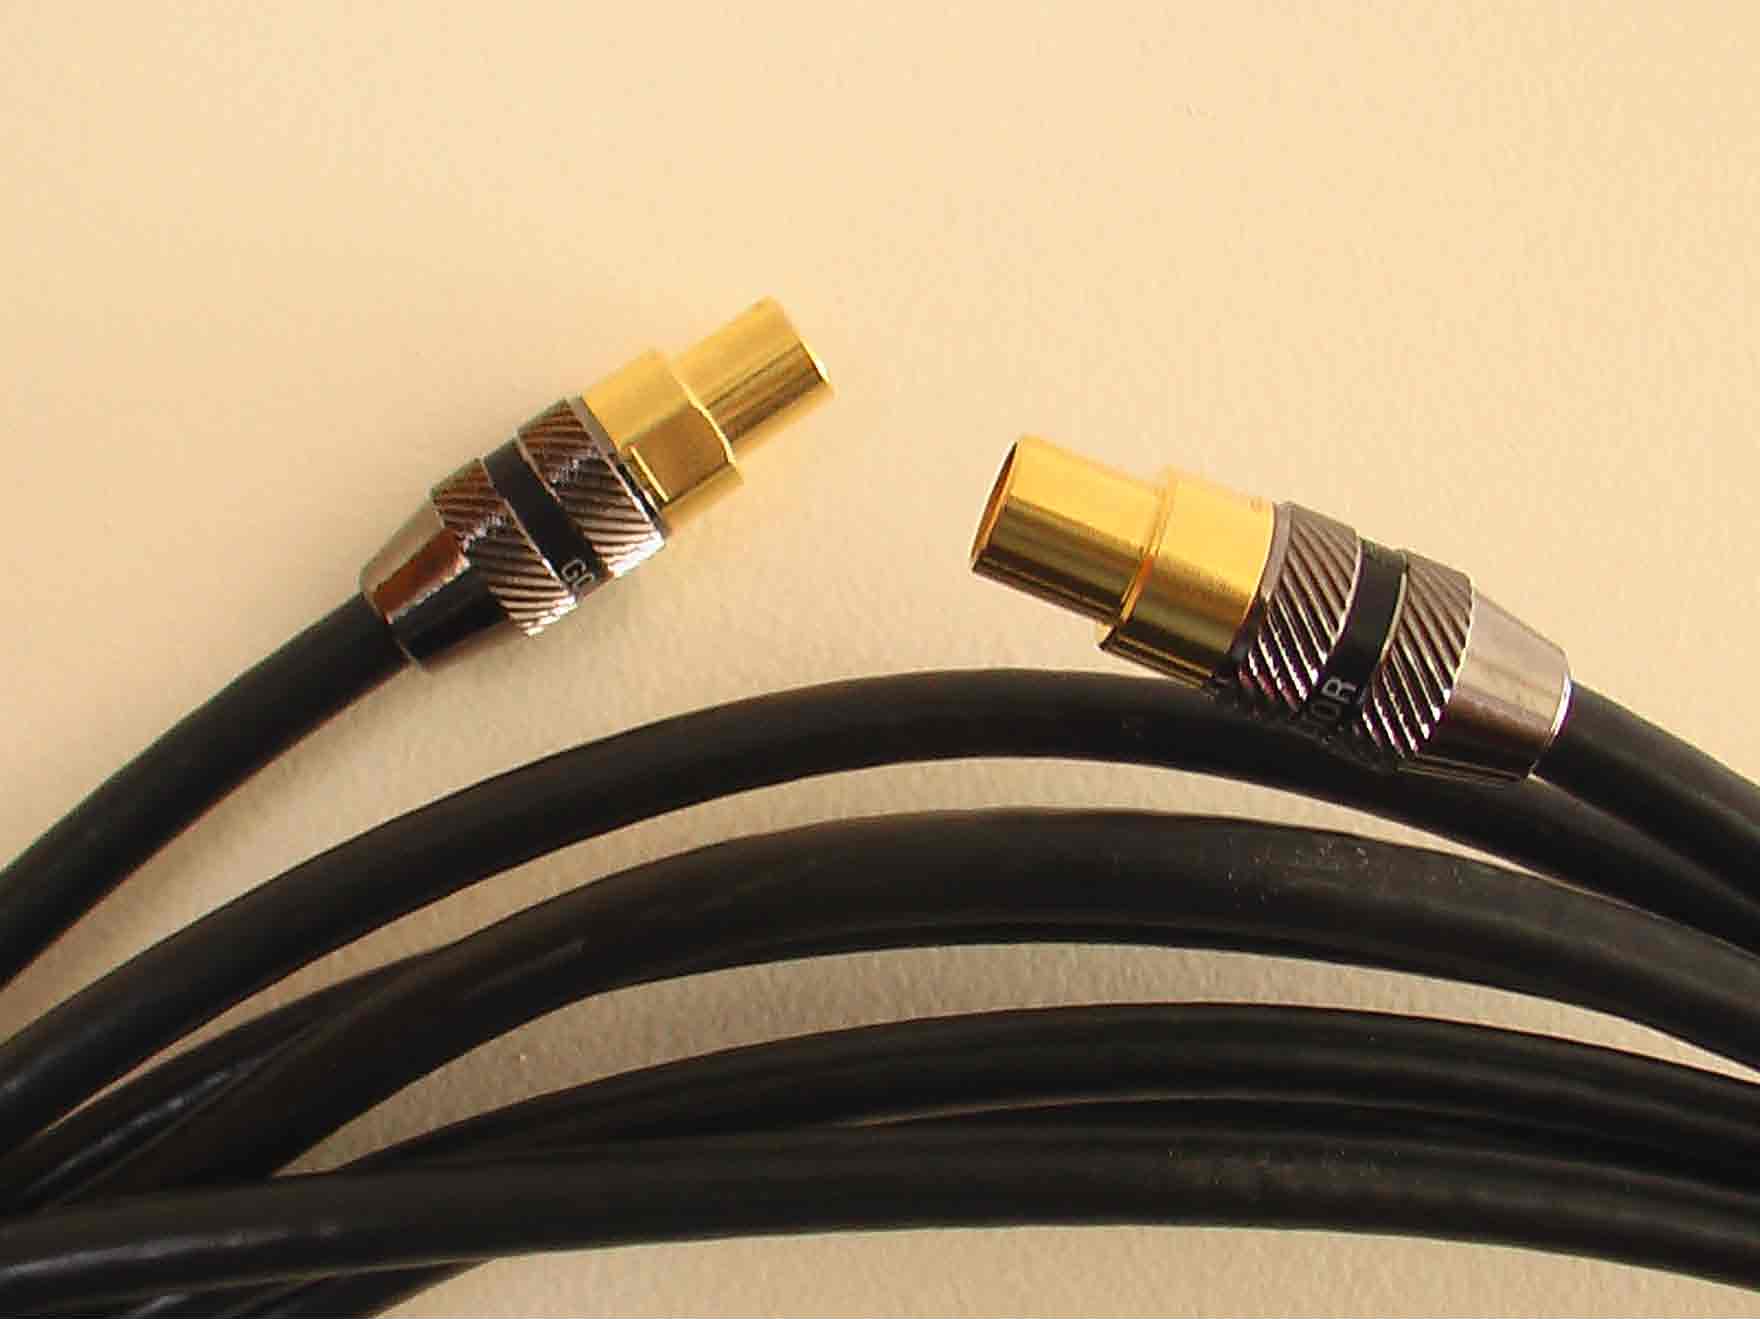 PAL-type plugs with RG6 Quad coaxial cable to minimize interference pickup